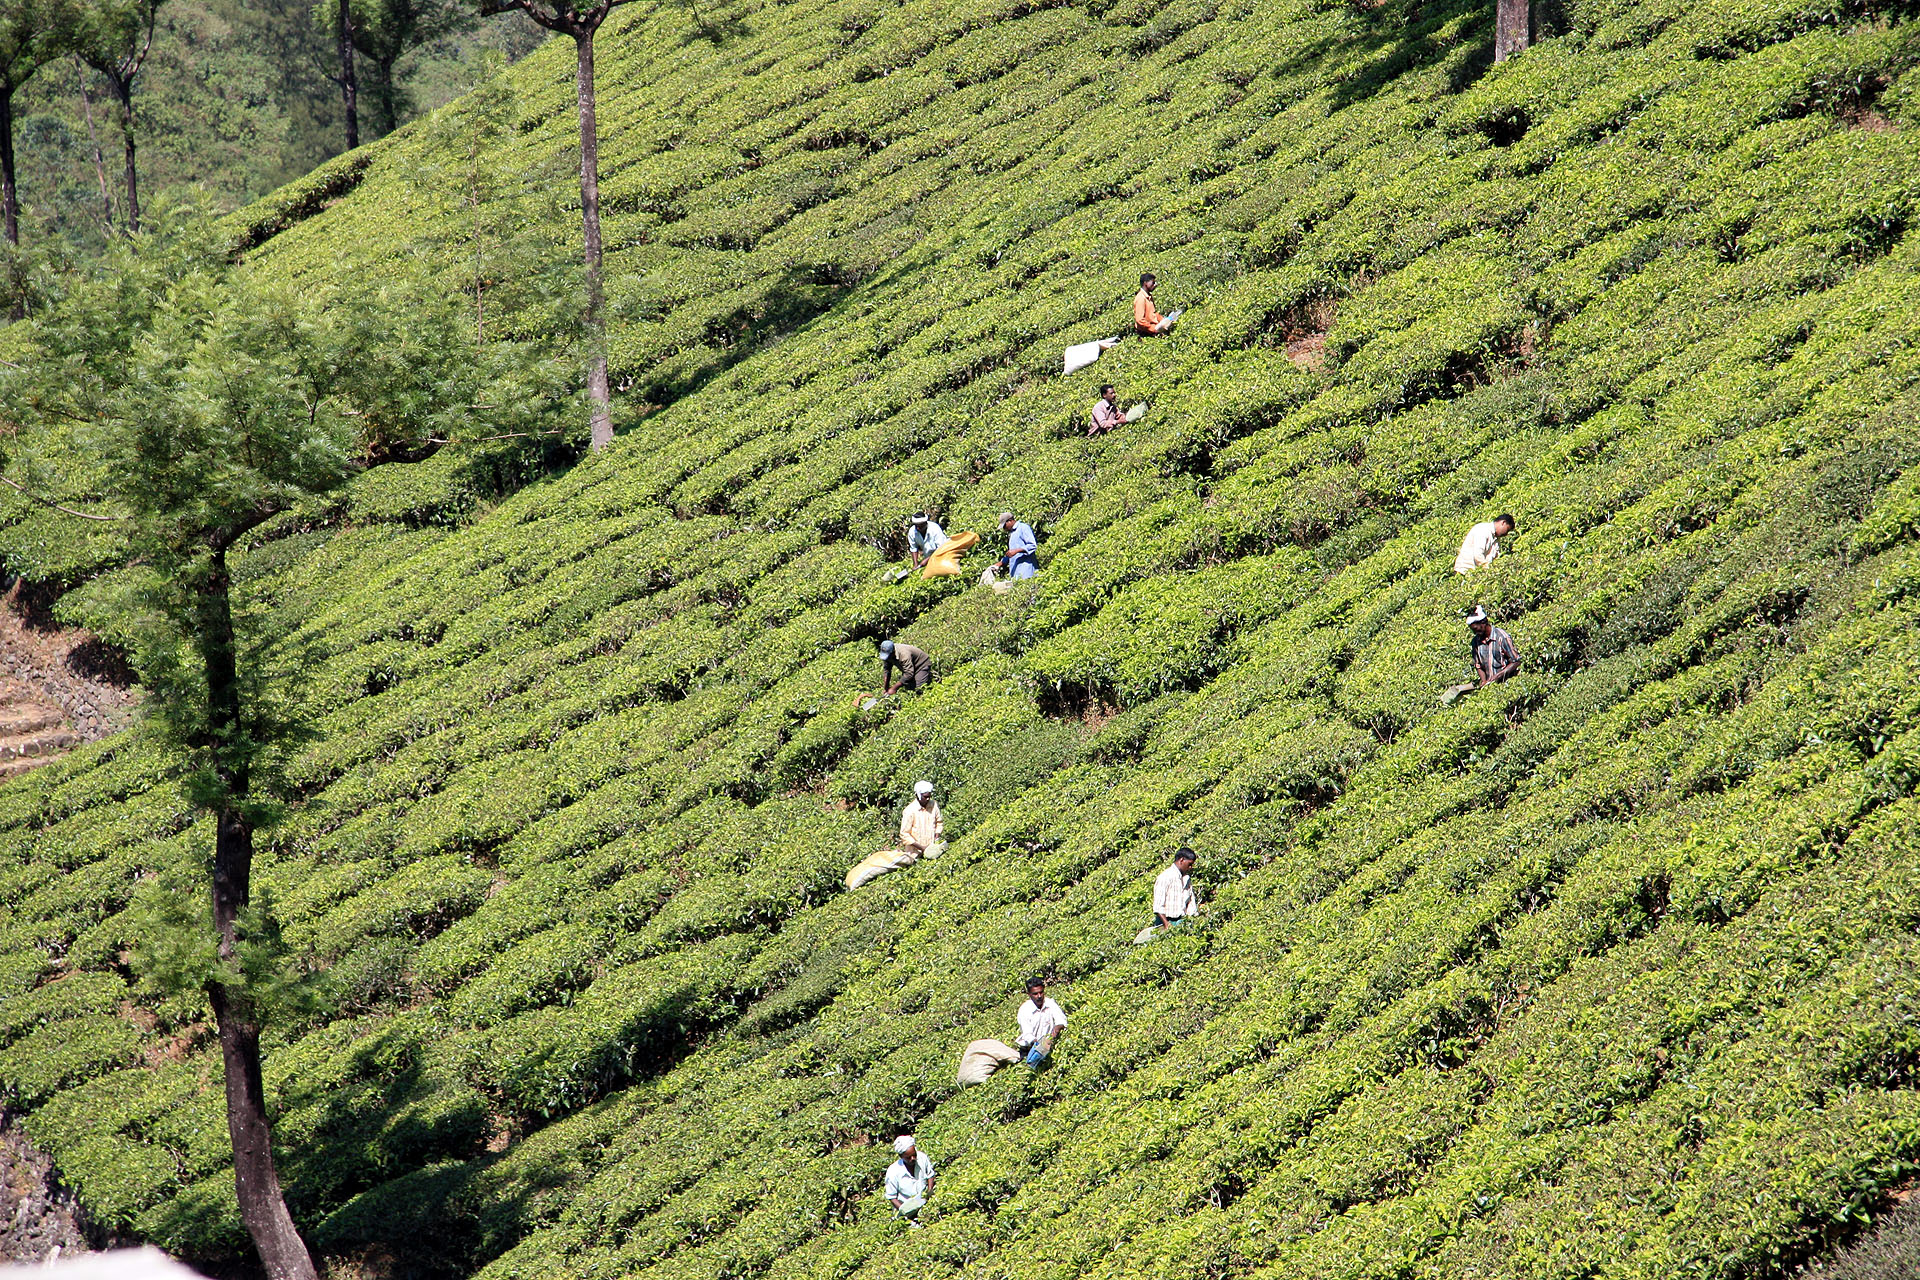 Workers hand picking tea